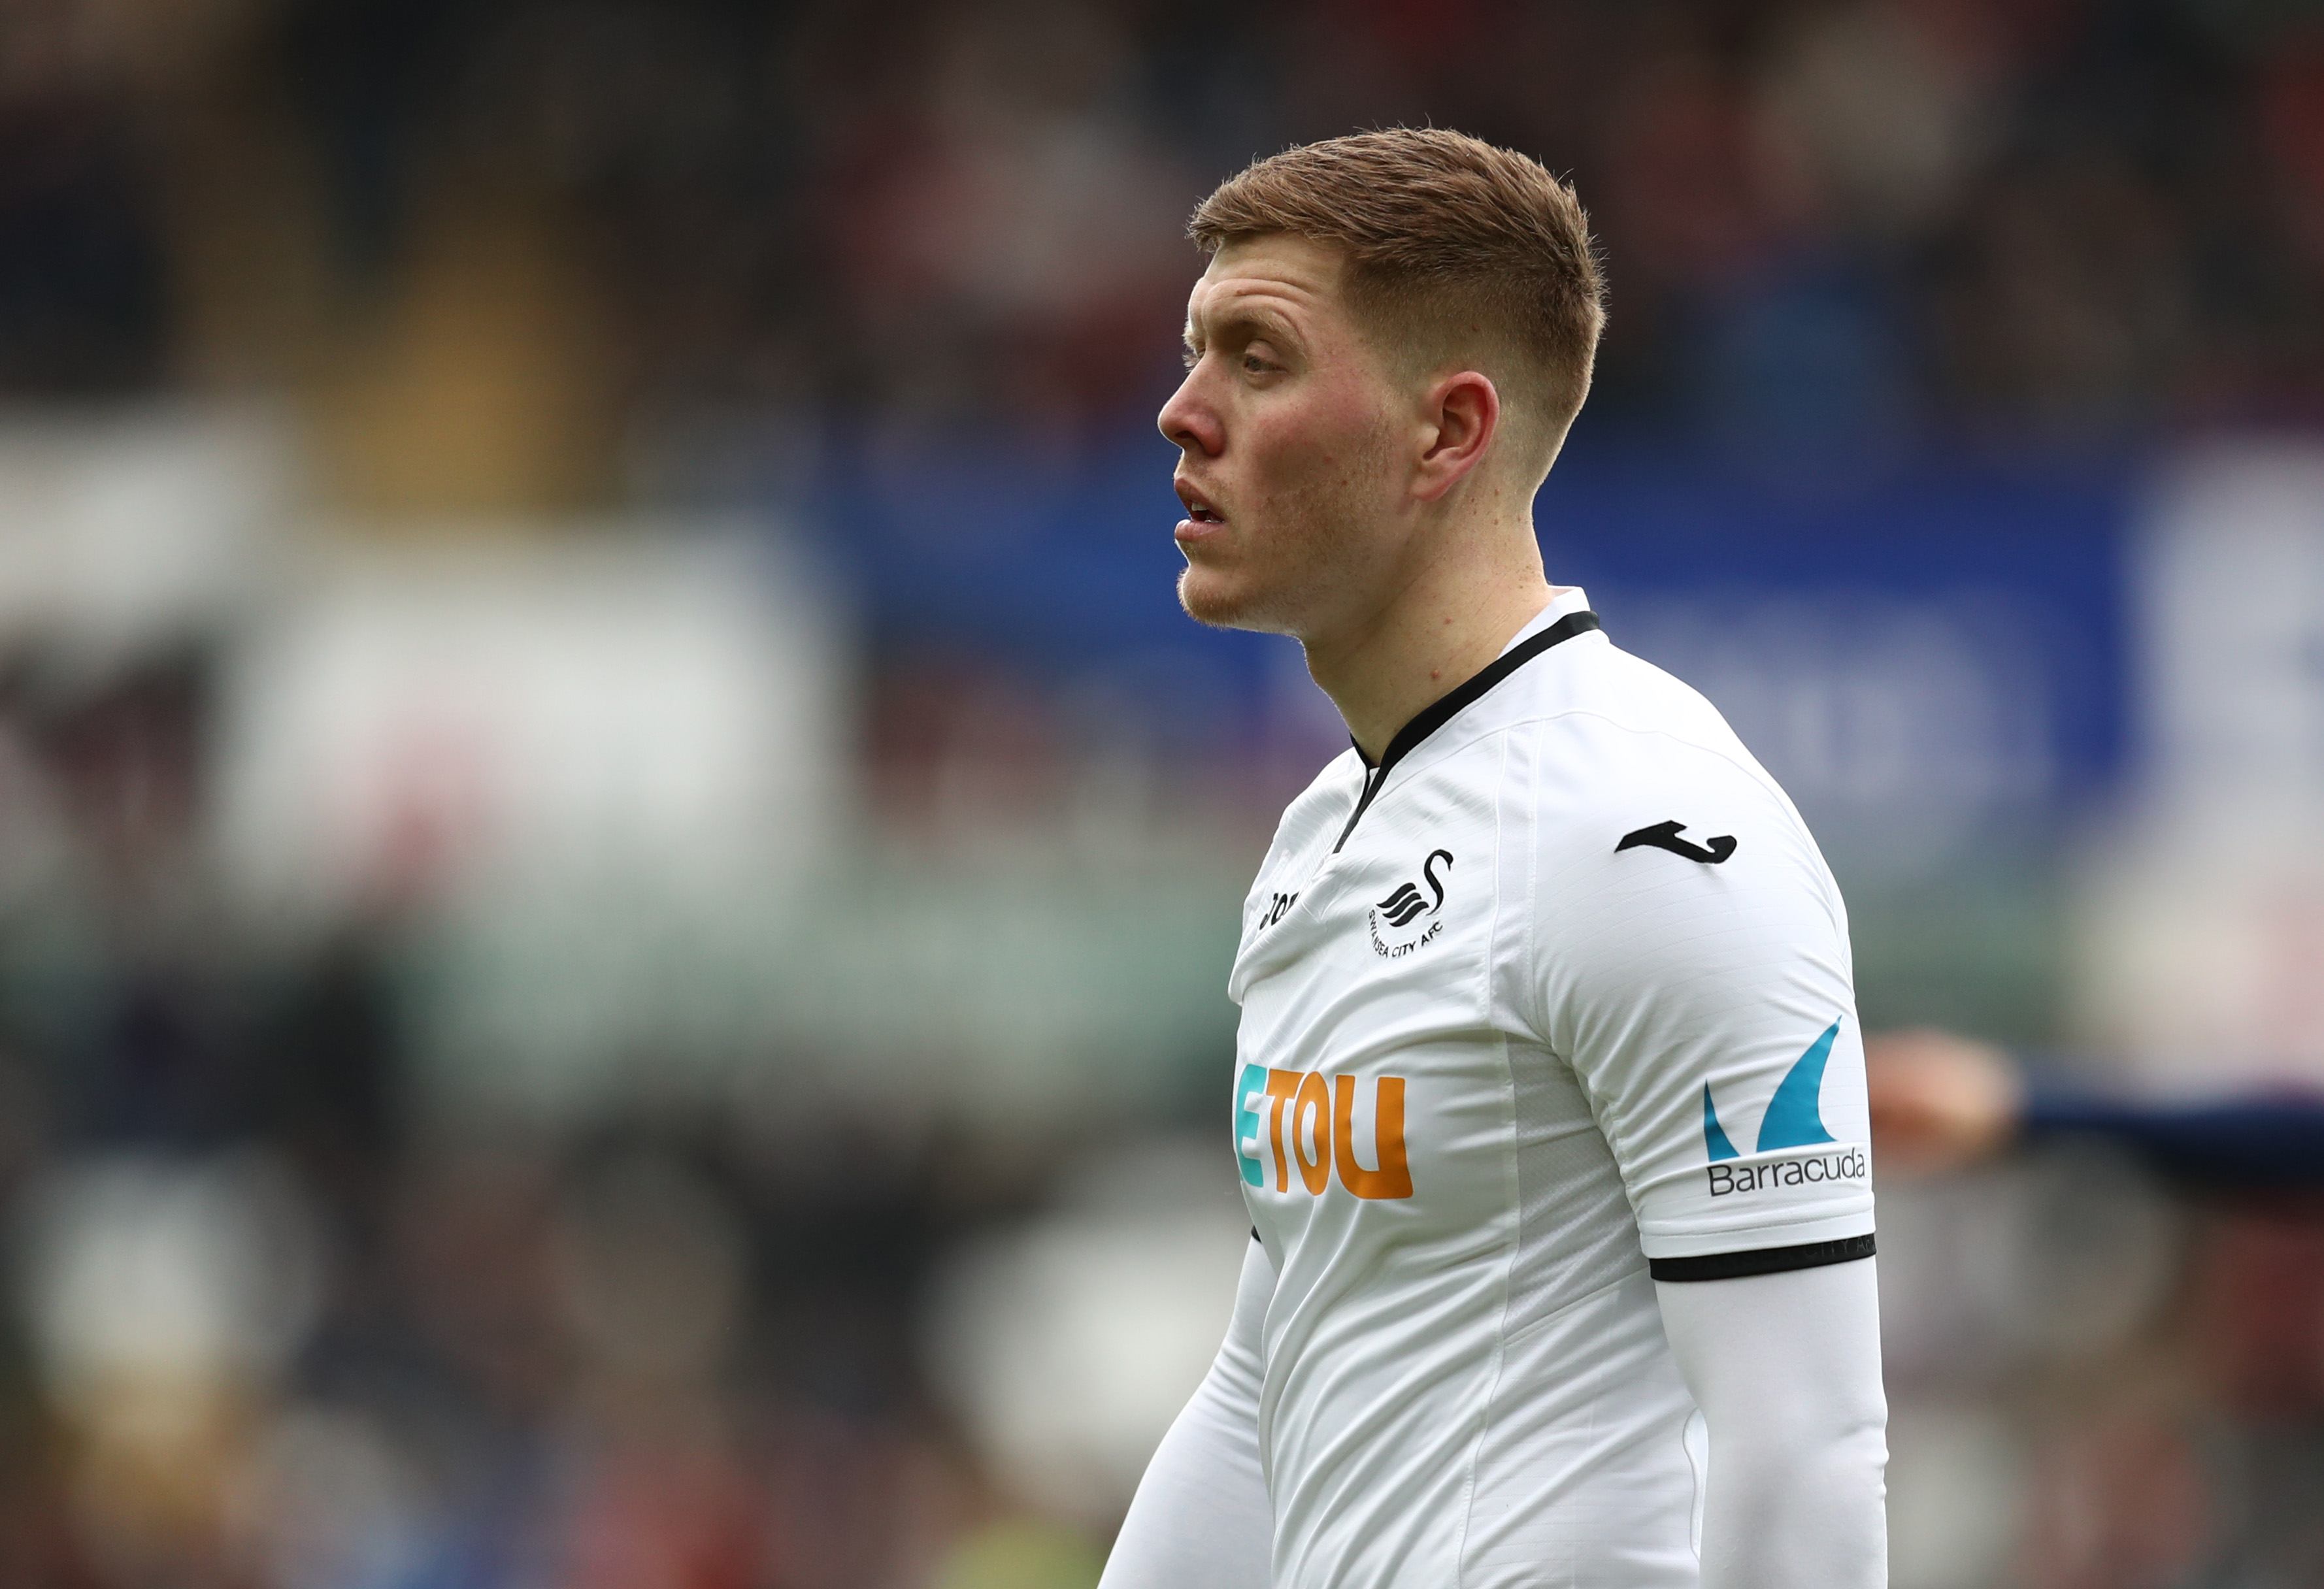 SWANSEA, WALES - MARCH 17: Alfie Mawson of Swansea City during The Emirates FA Cup Quarter Final match between Swansea City and Tottenham Hotspur at Liberty Stadium on March 17, 2018 in Swansea, Wales. (Photo by Catherine Ivill/Getty Images)